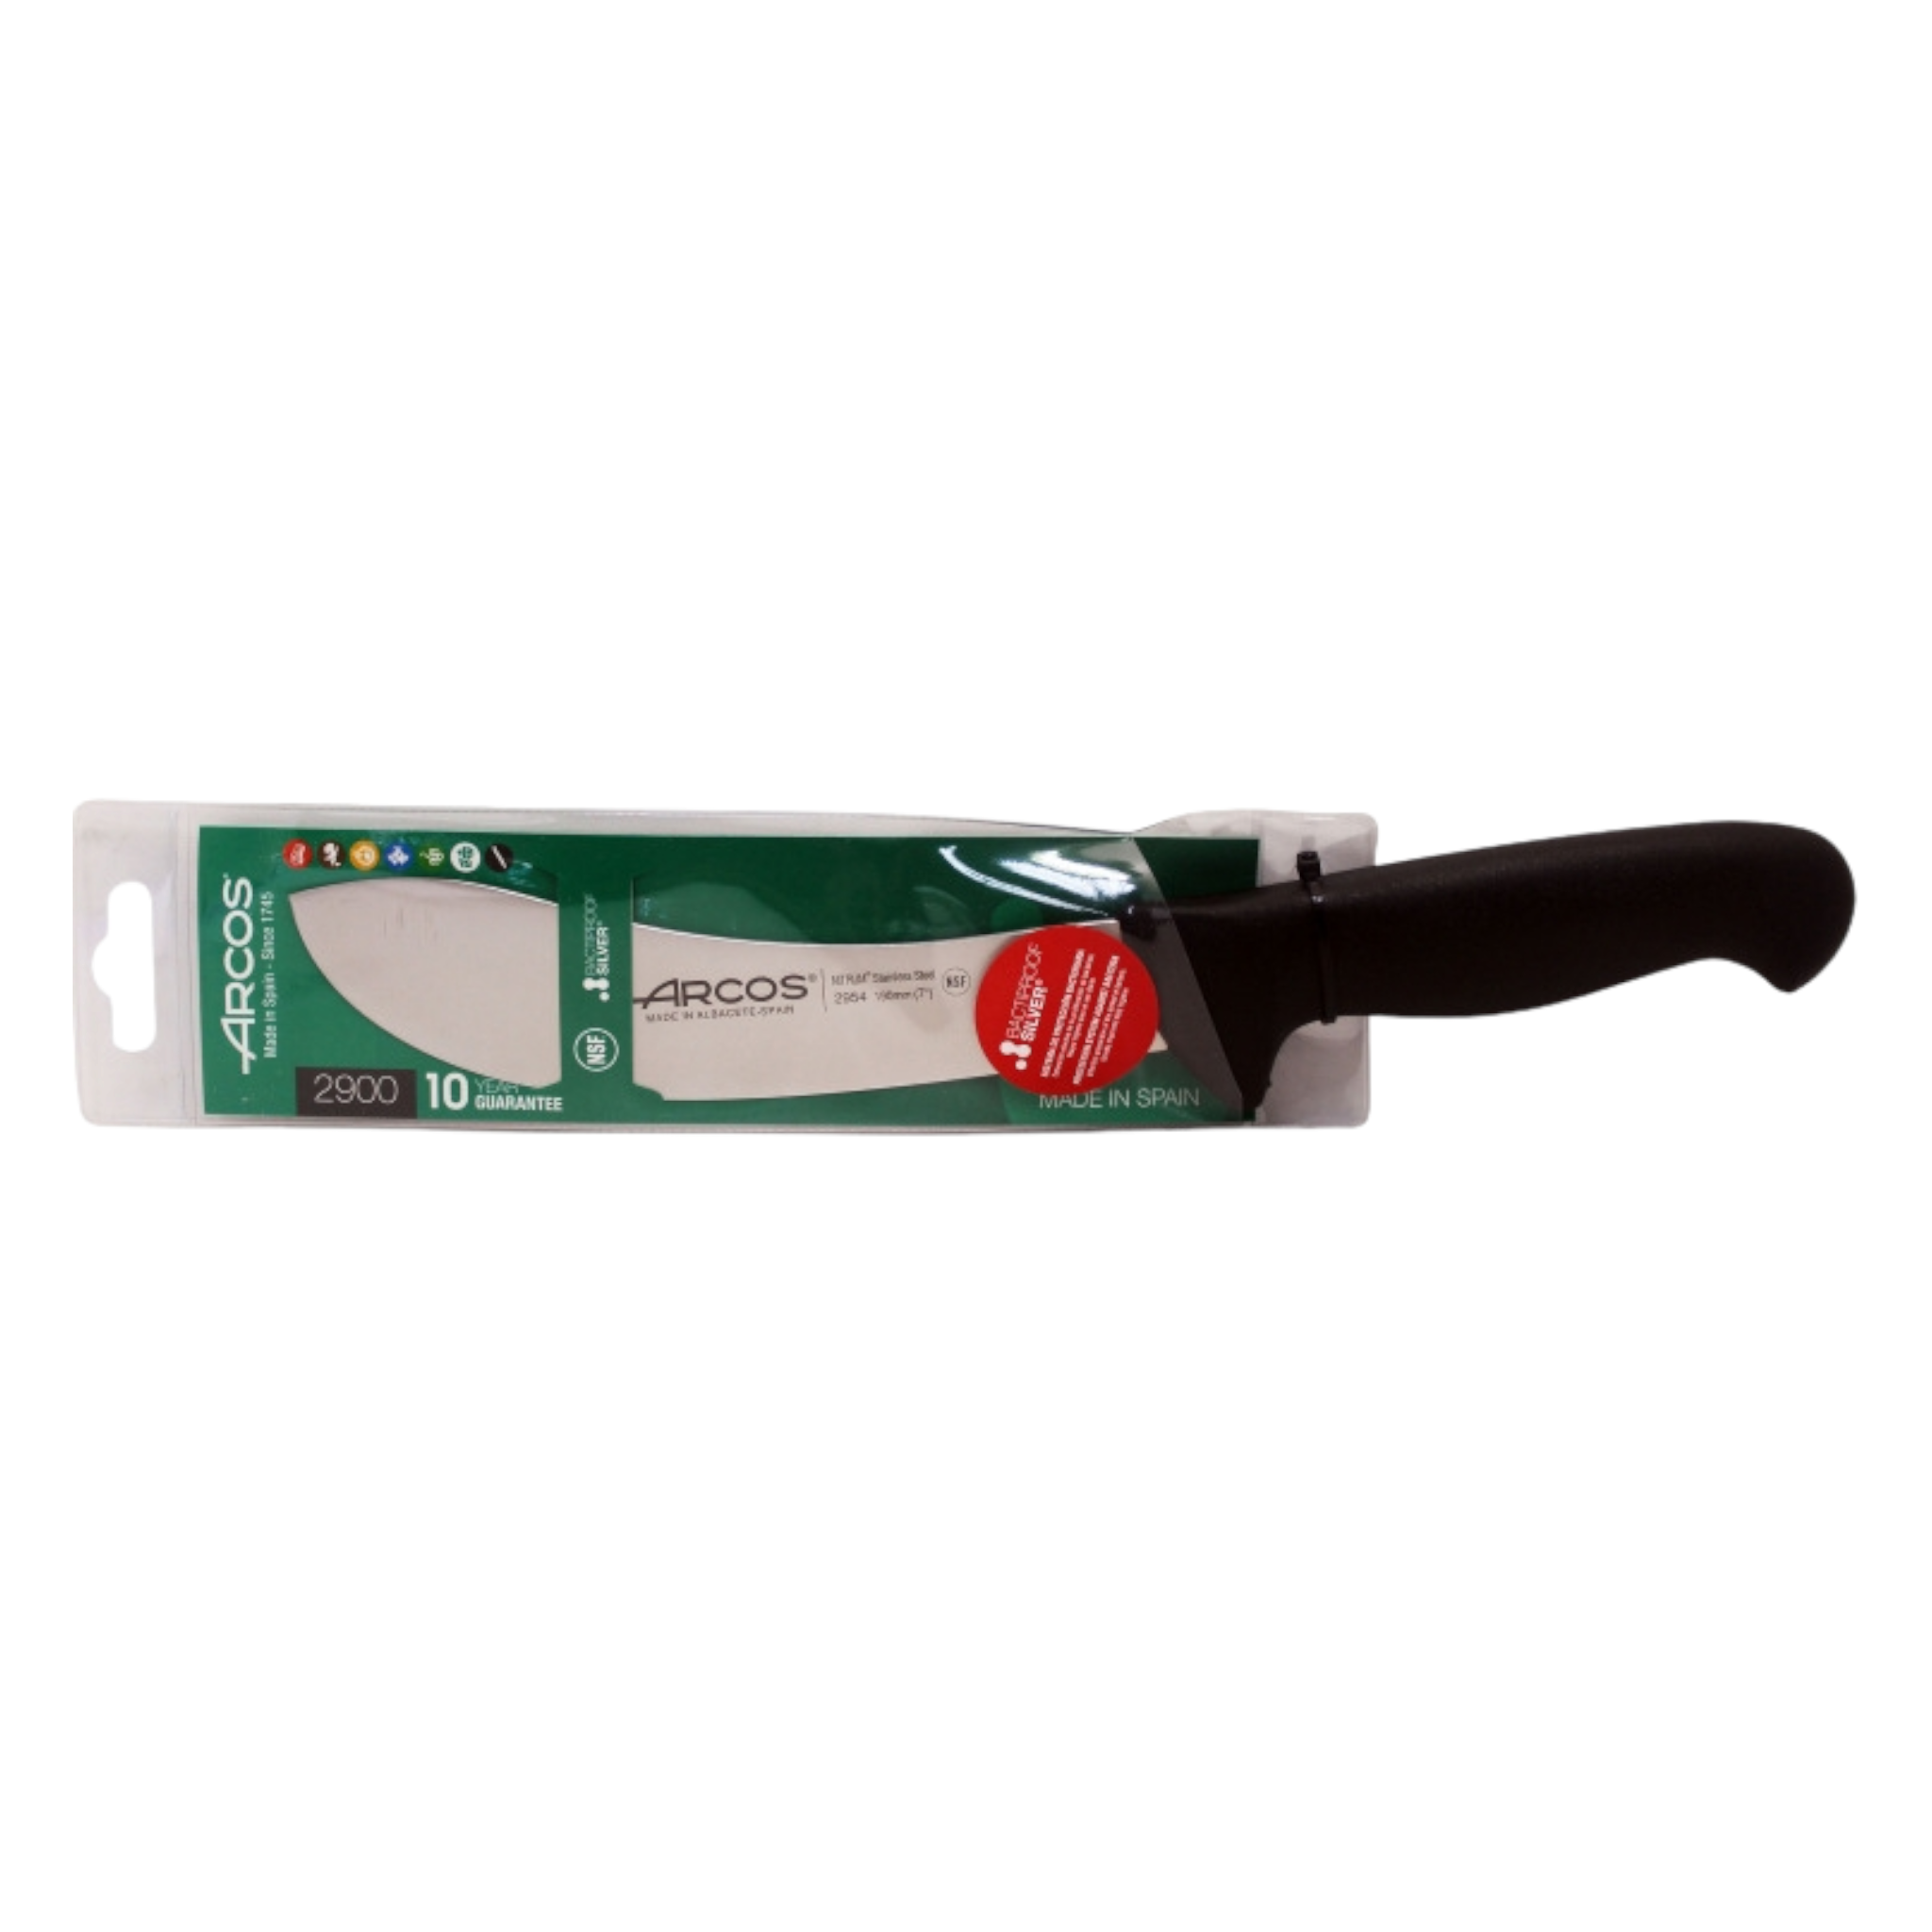 Arcos Skinning Knife 180 to 190mm KN2954